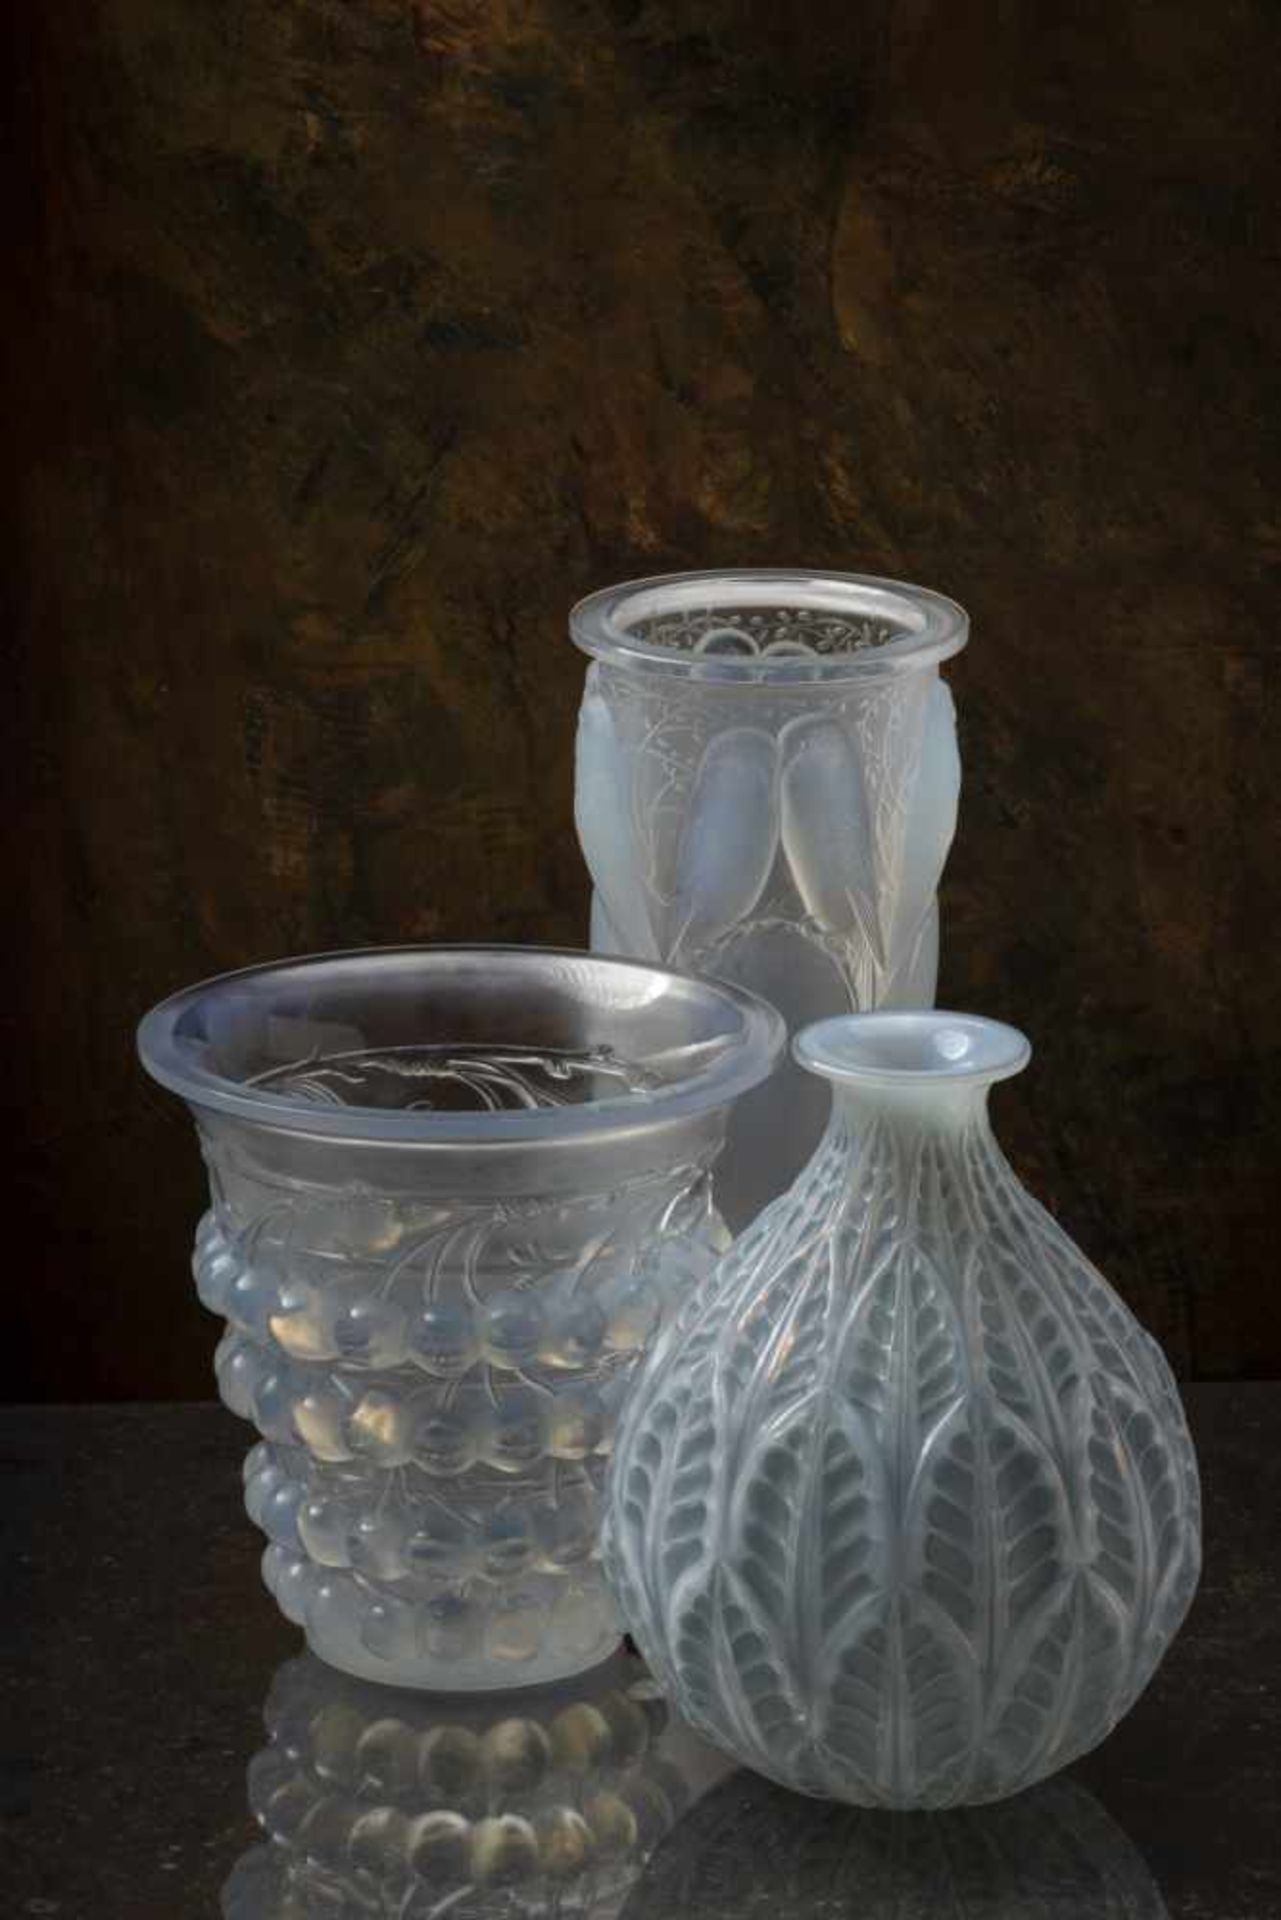 René Lalique, 'Ceylan' vase, 1924'Ceylan' vase, 1924H. 24.3 cm. Clear, moulded glass, satined and - Image 10 of 10